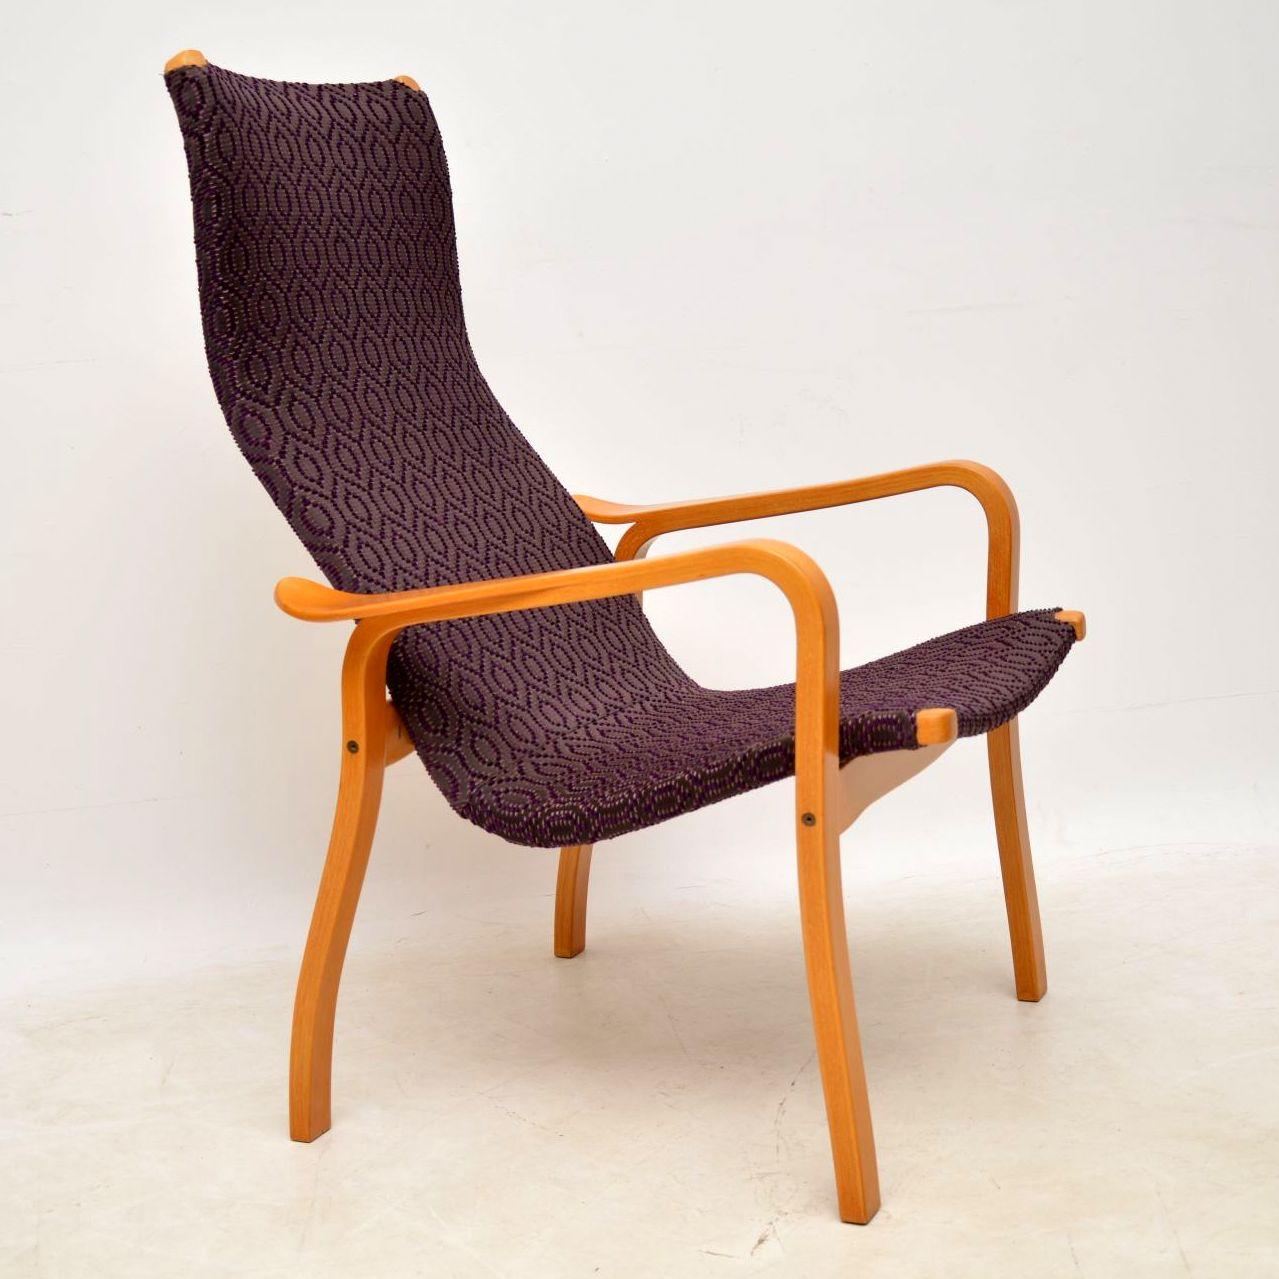 A stylish and extremely comfortable vintage armchair, made in Sweden by Swedese, this was designed by Yngve Ekstrom. The condition is superb for its age, the frame has just been fully stripped and re-polished to a very high standard, and it was